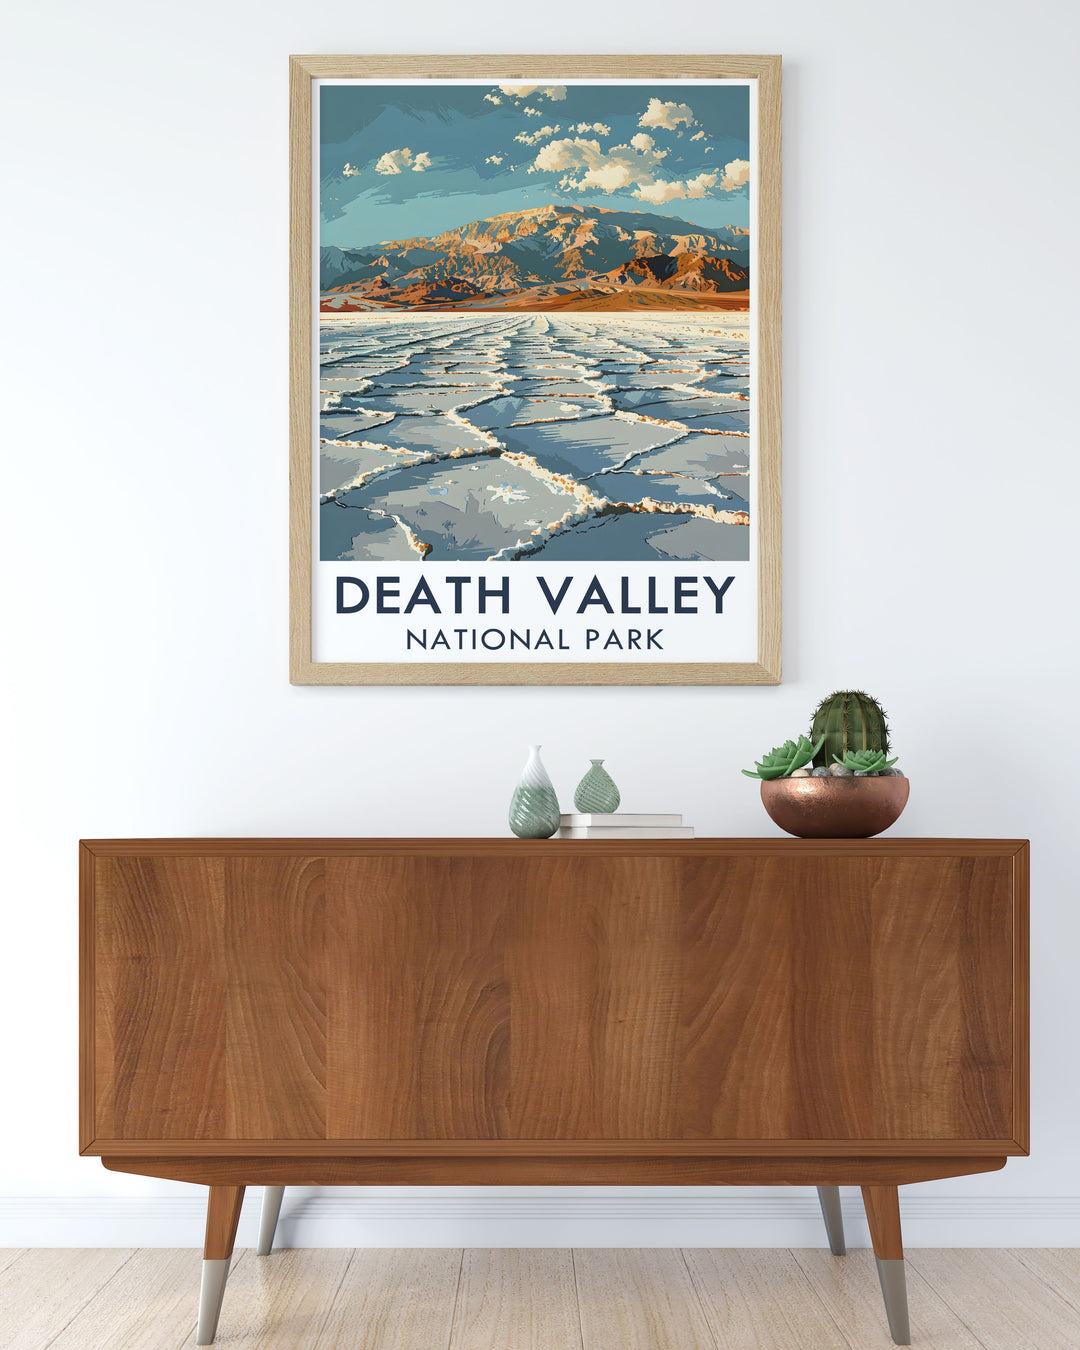 Vintage poster highlighting the stark beauty of Death Valleys desert landscape, featuring the parks iconic salt flats and rugged terrain.